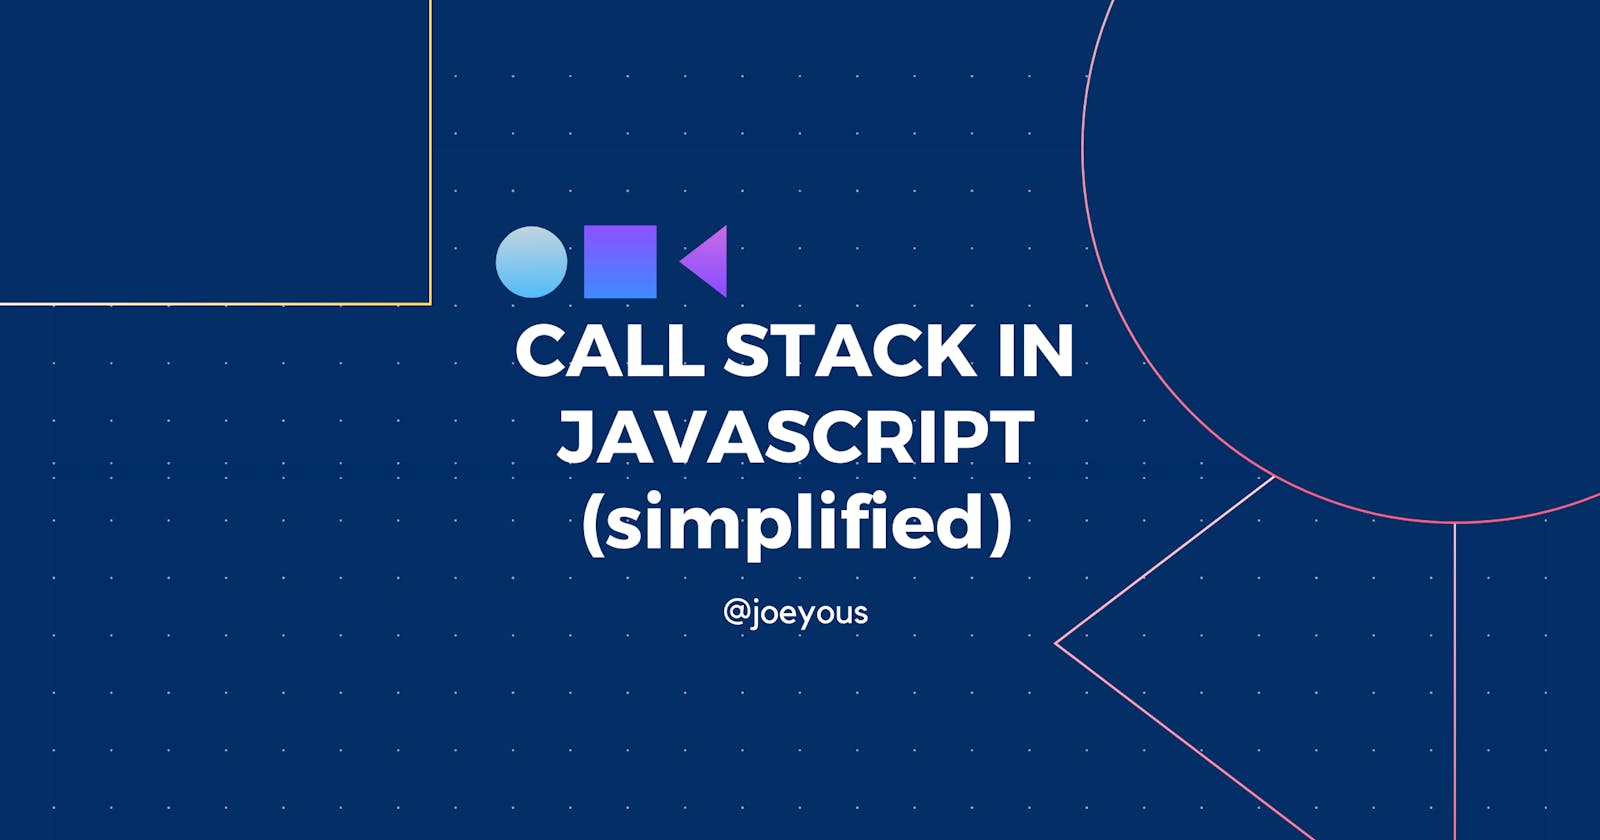 But, can you explain CALL STACK IN JAVASCRIPT?